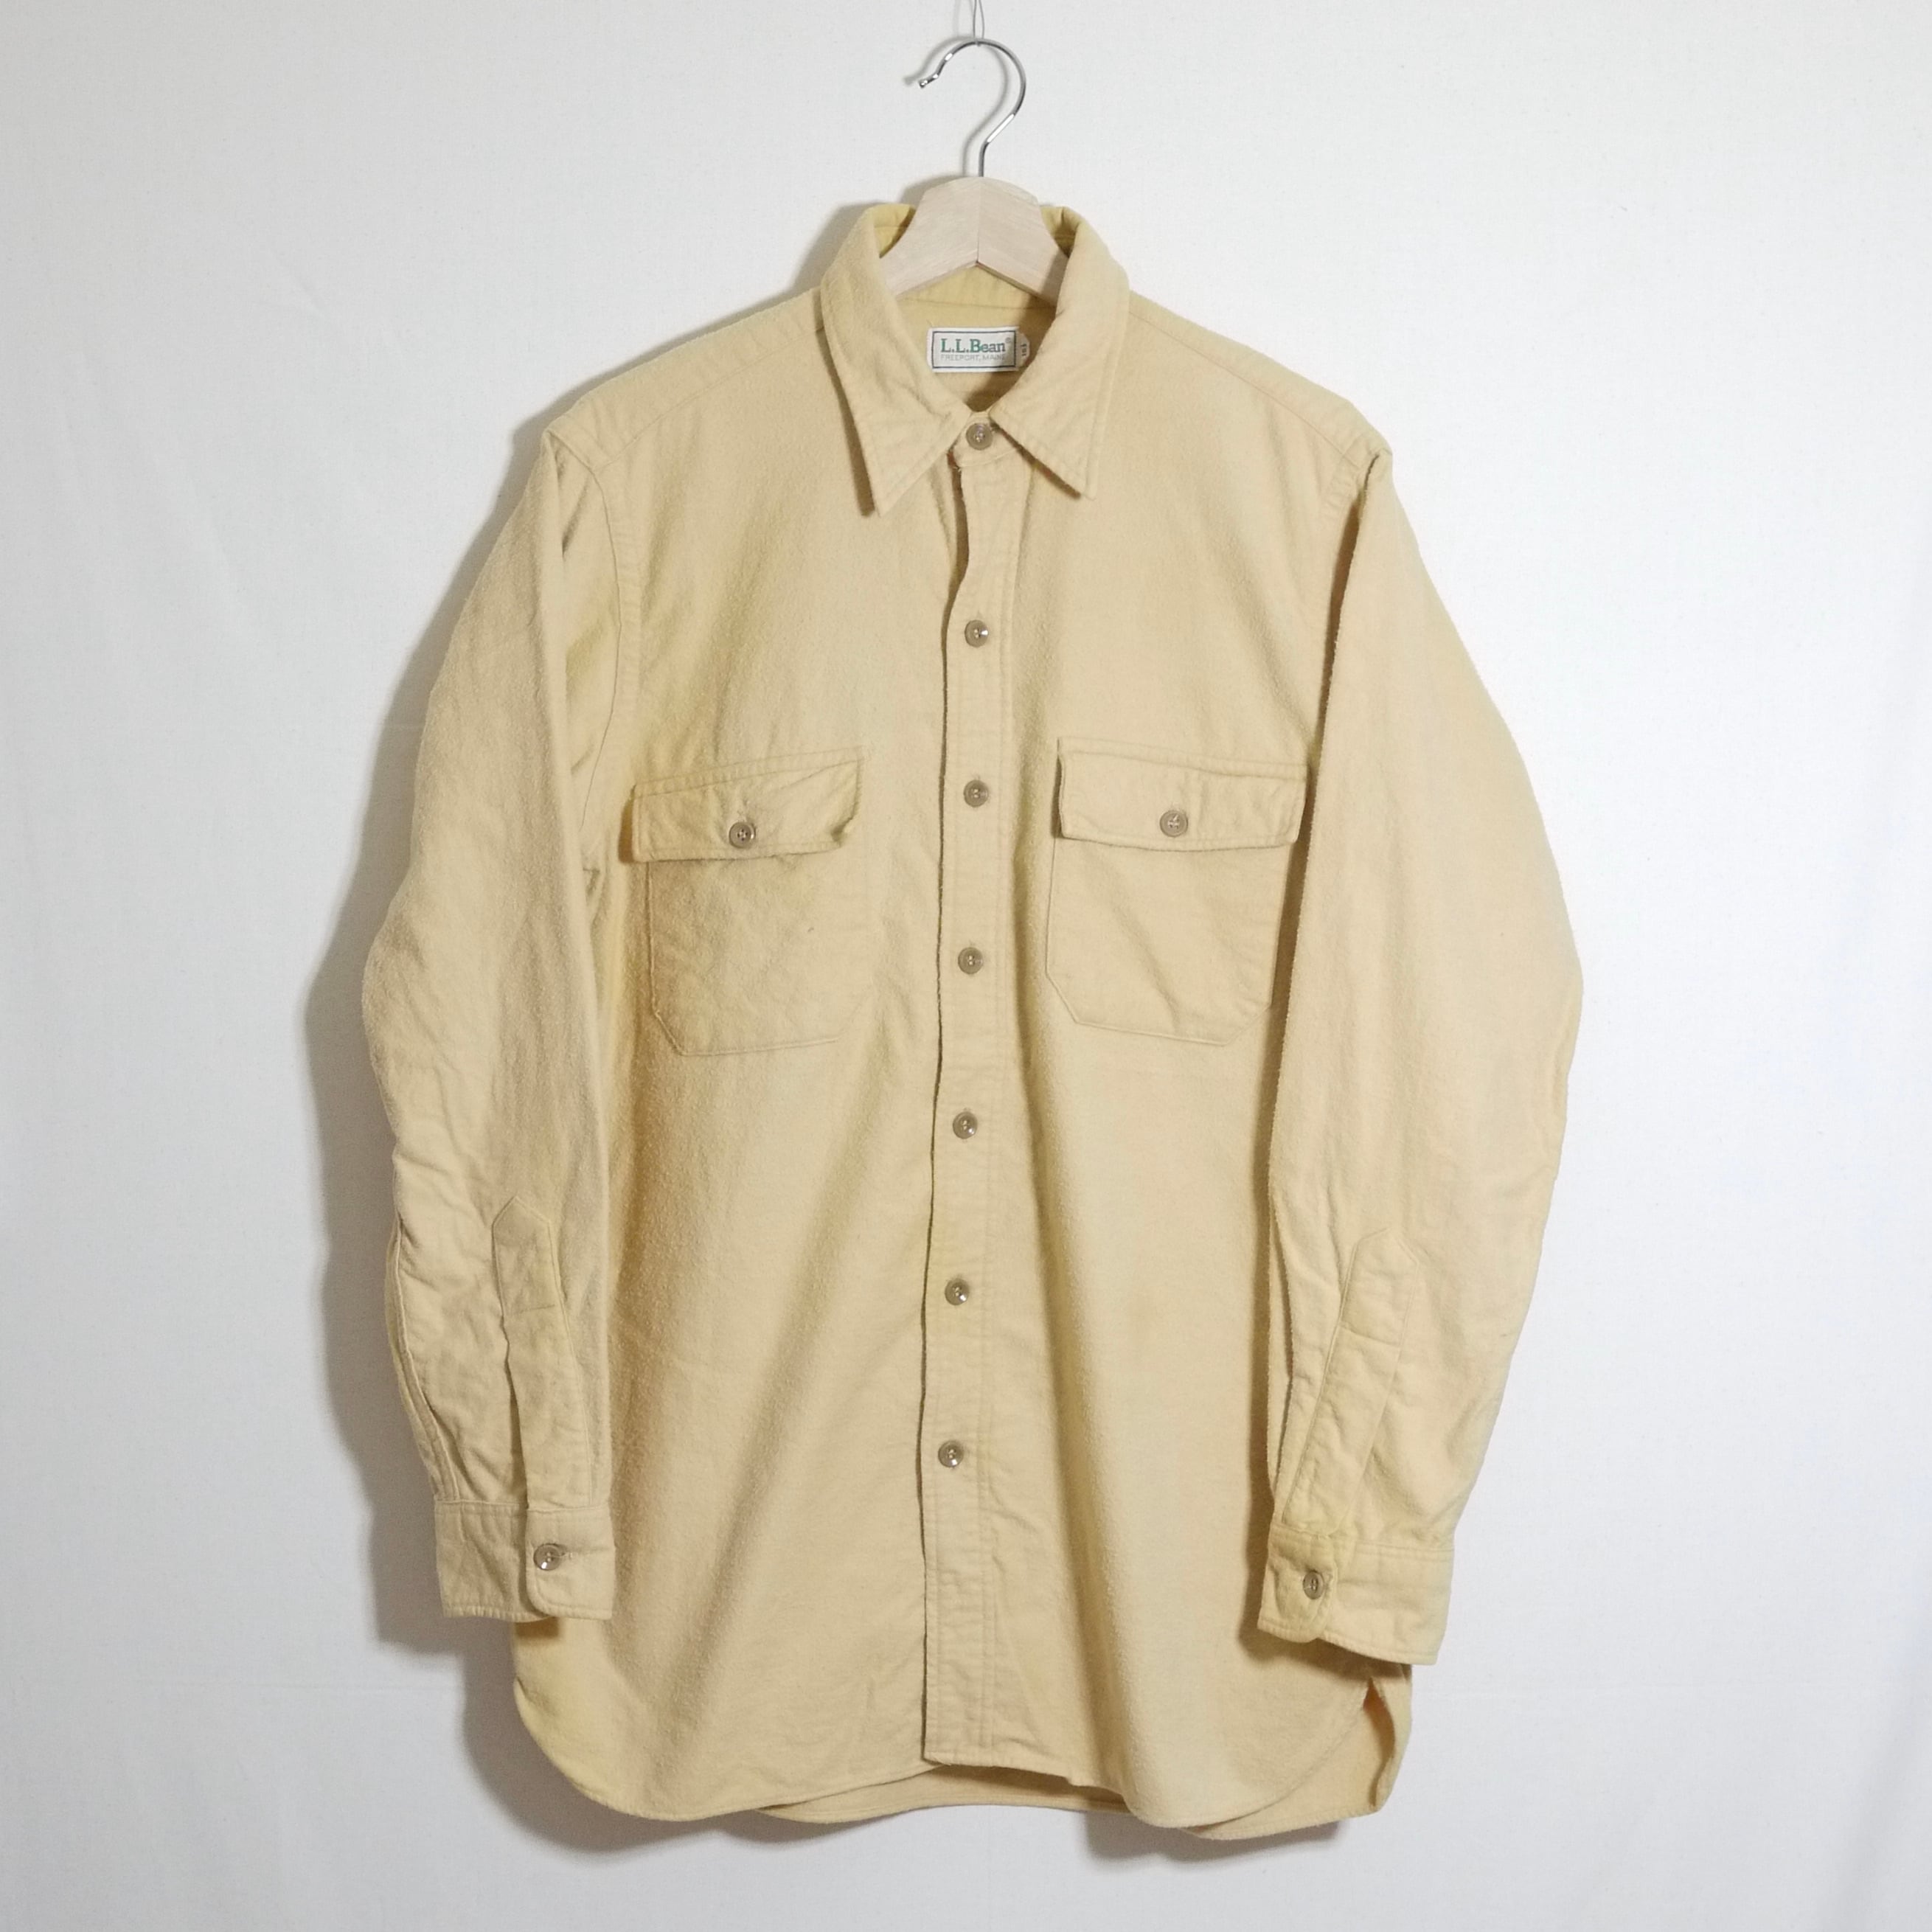 1980's Chamois Cloth Shirt Size15 1/2 HOLIDAY WORKS